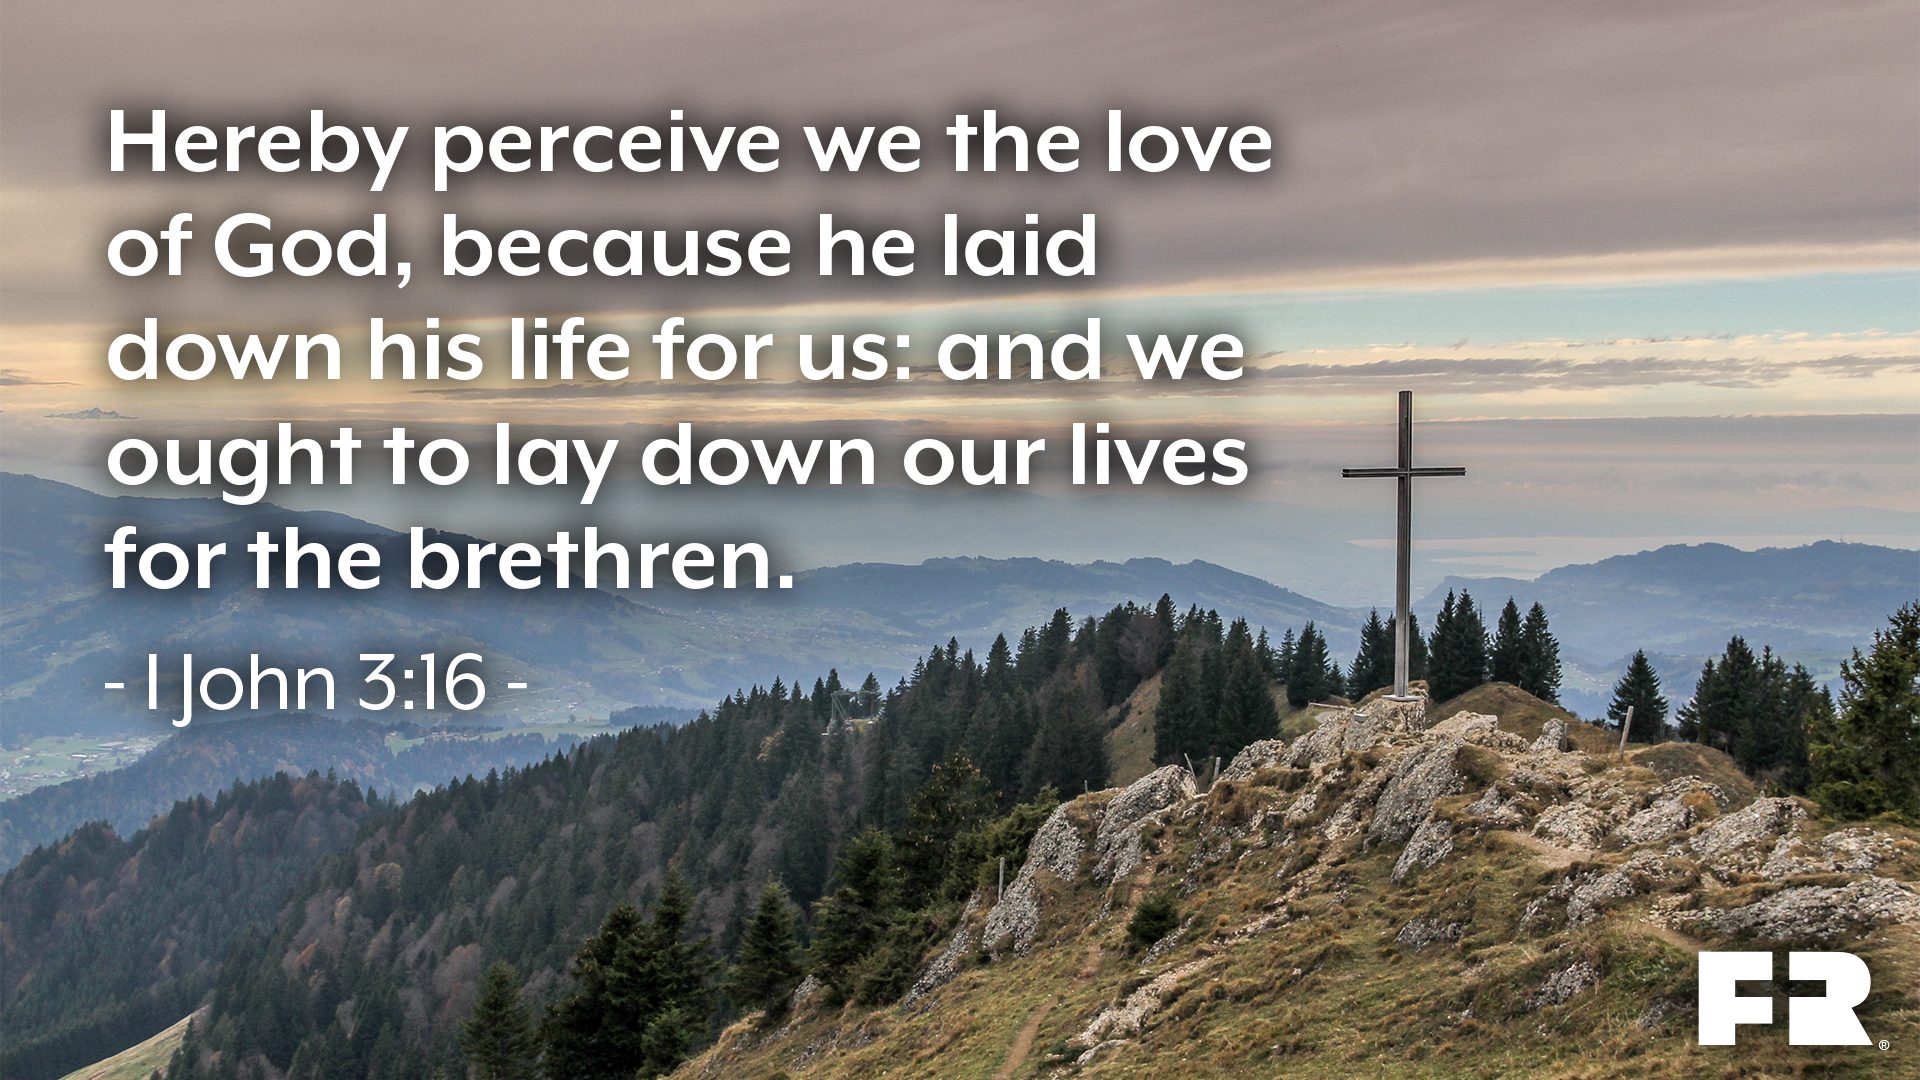 “Hereby perceive we the love of God, because he laid down his life for us: and we ought to lay down our lives for the brethren.”